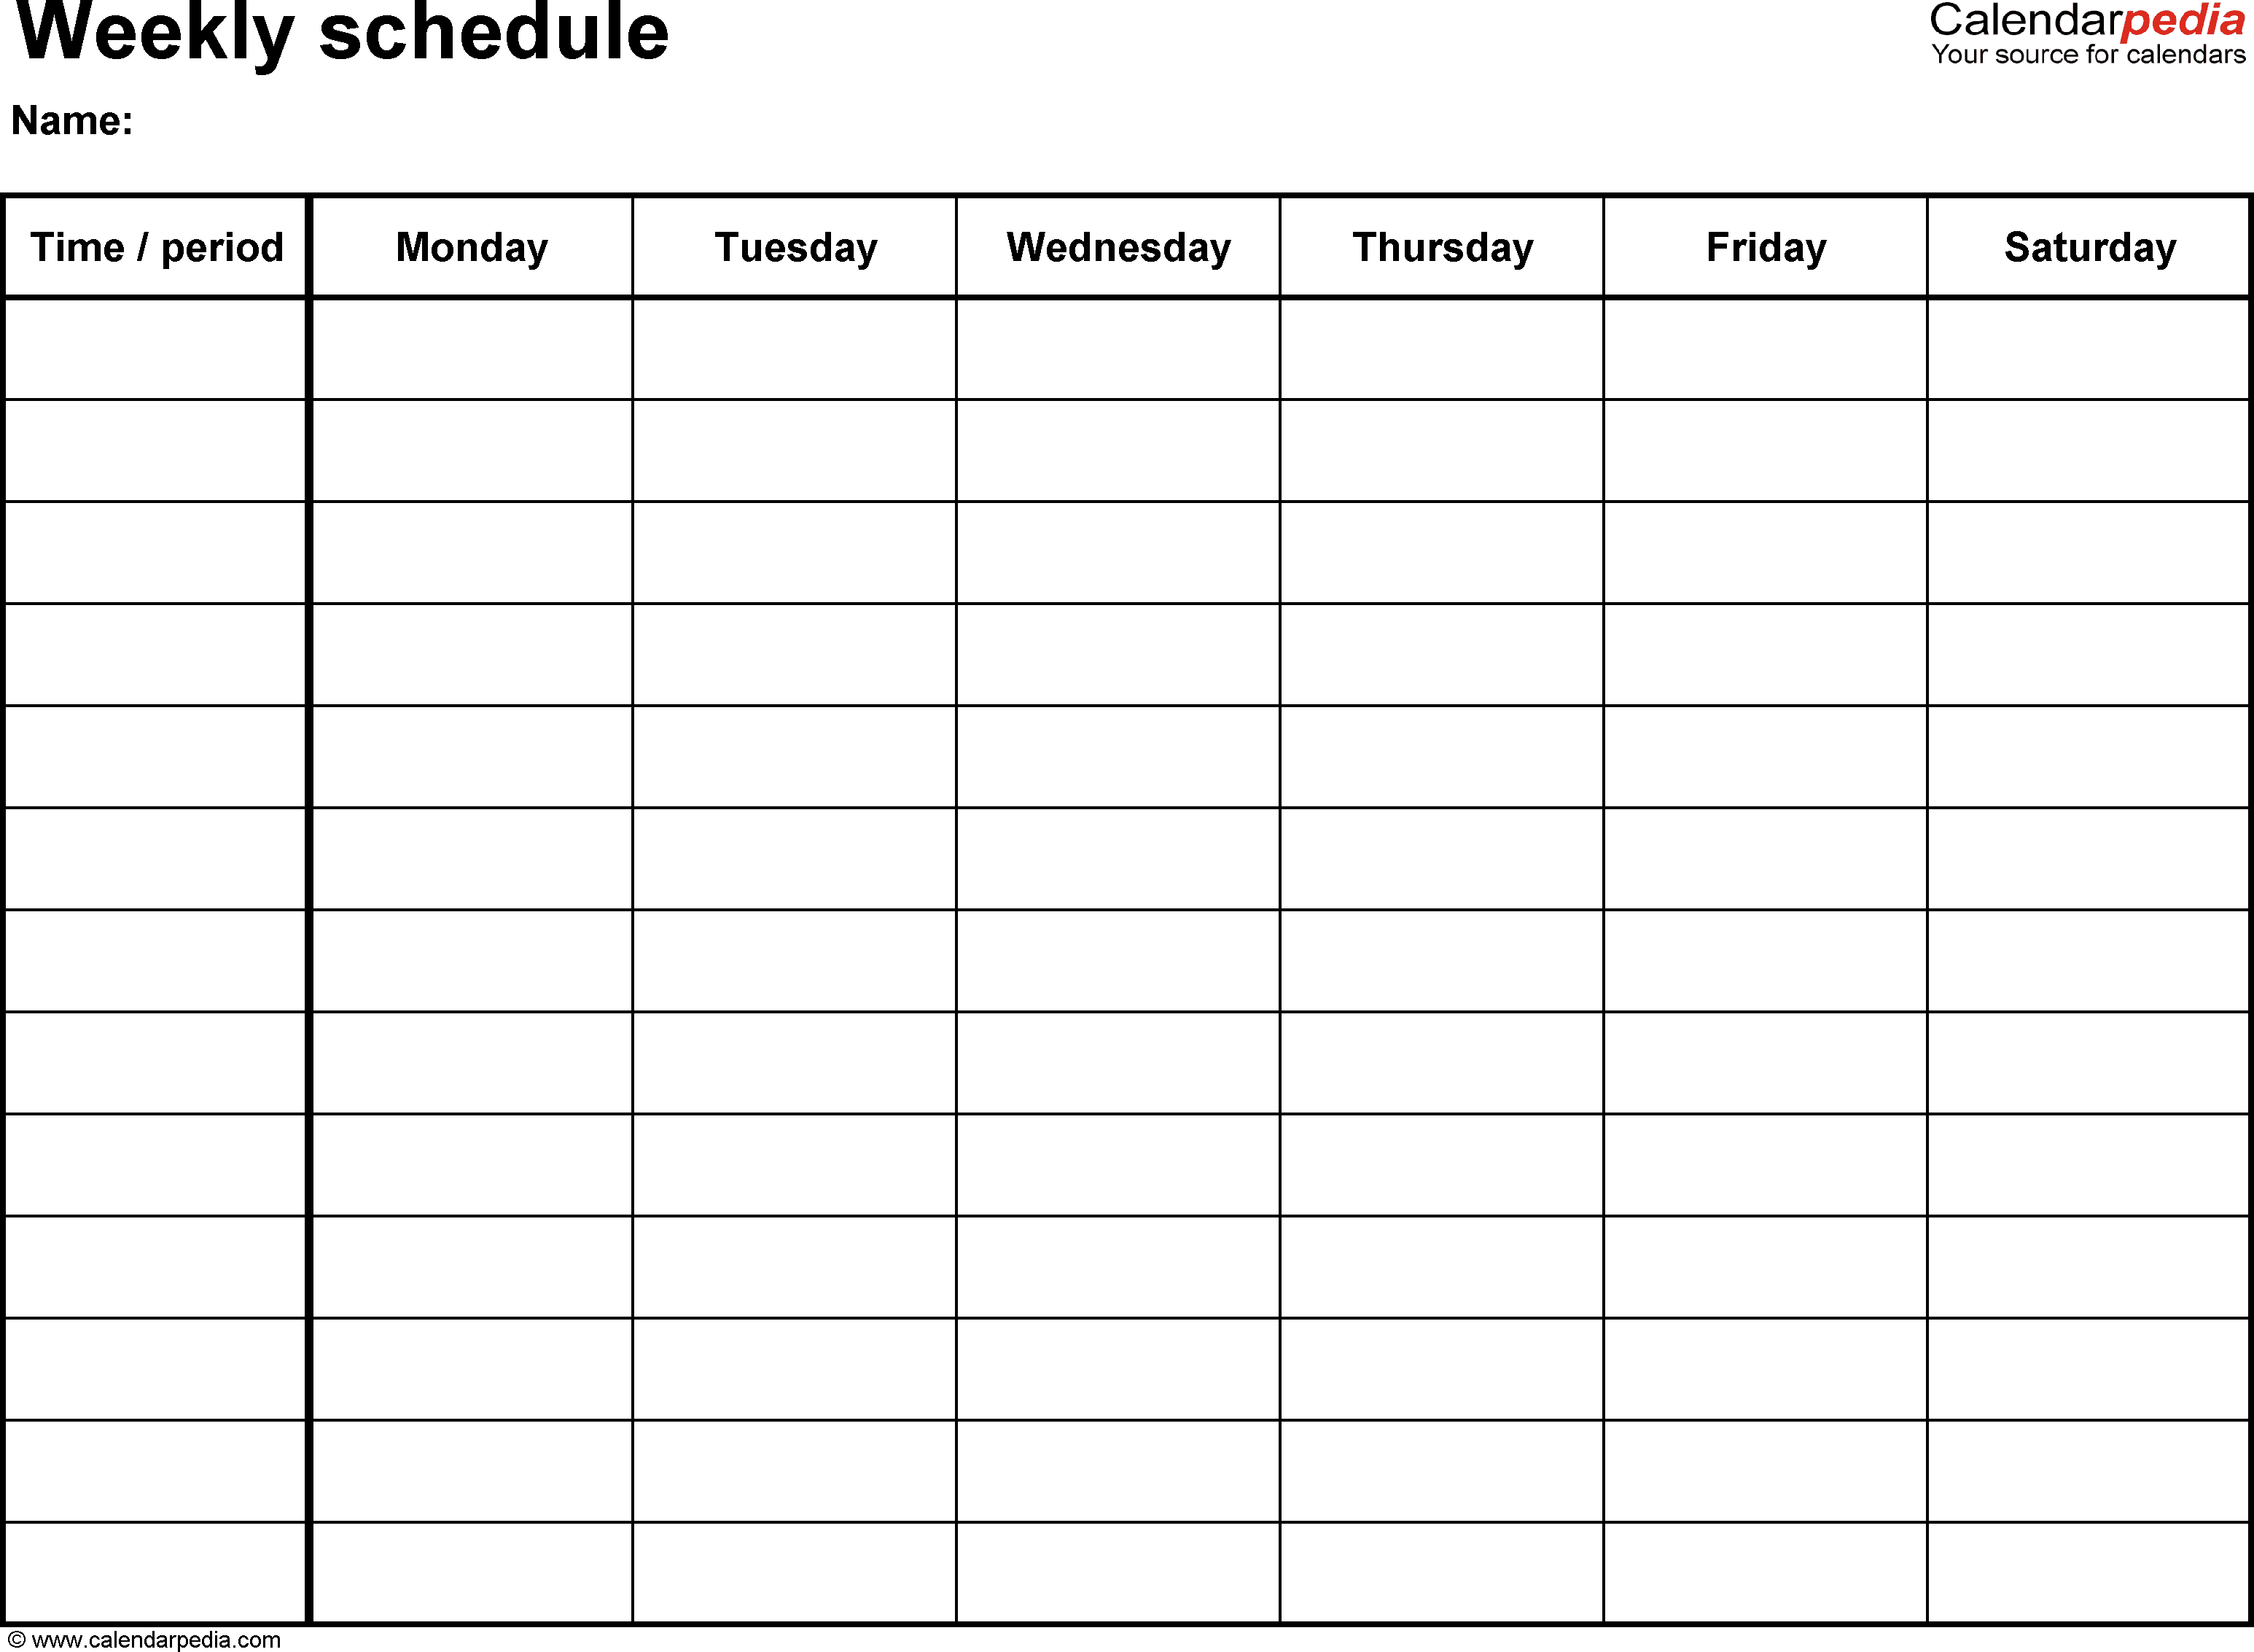 Weekly Schedule Template Pdf | listmachinepro.com